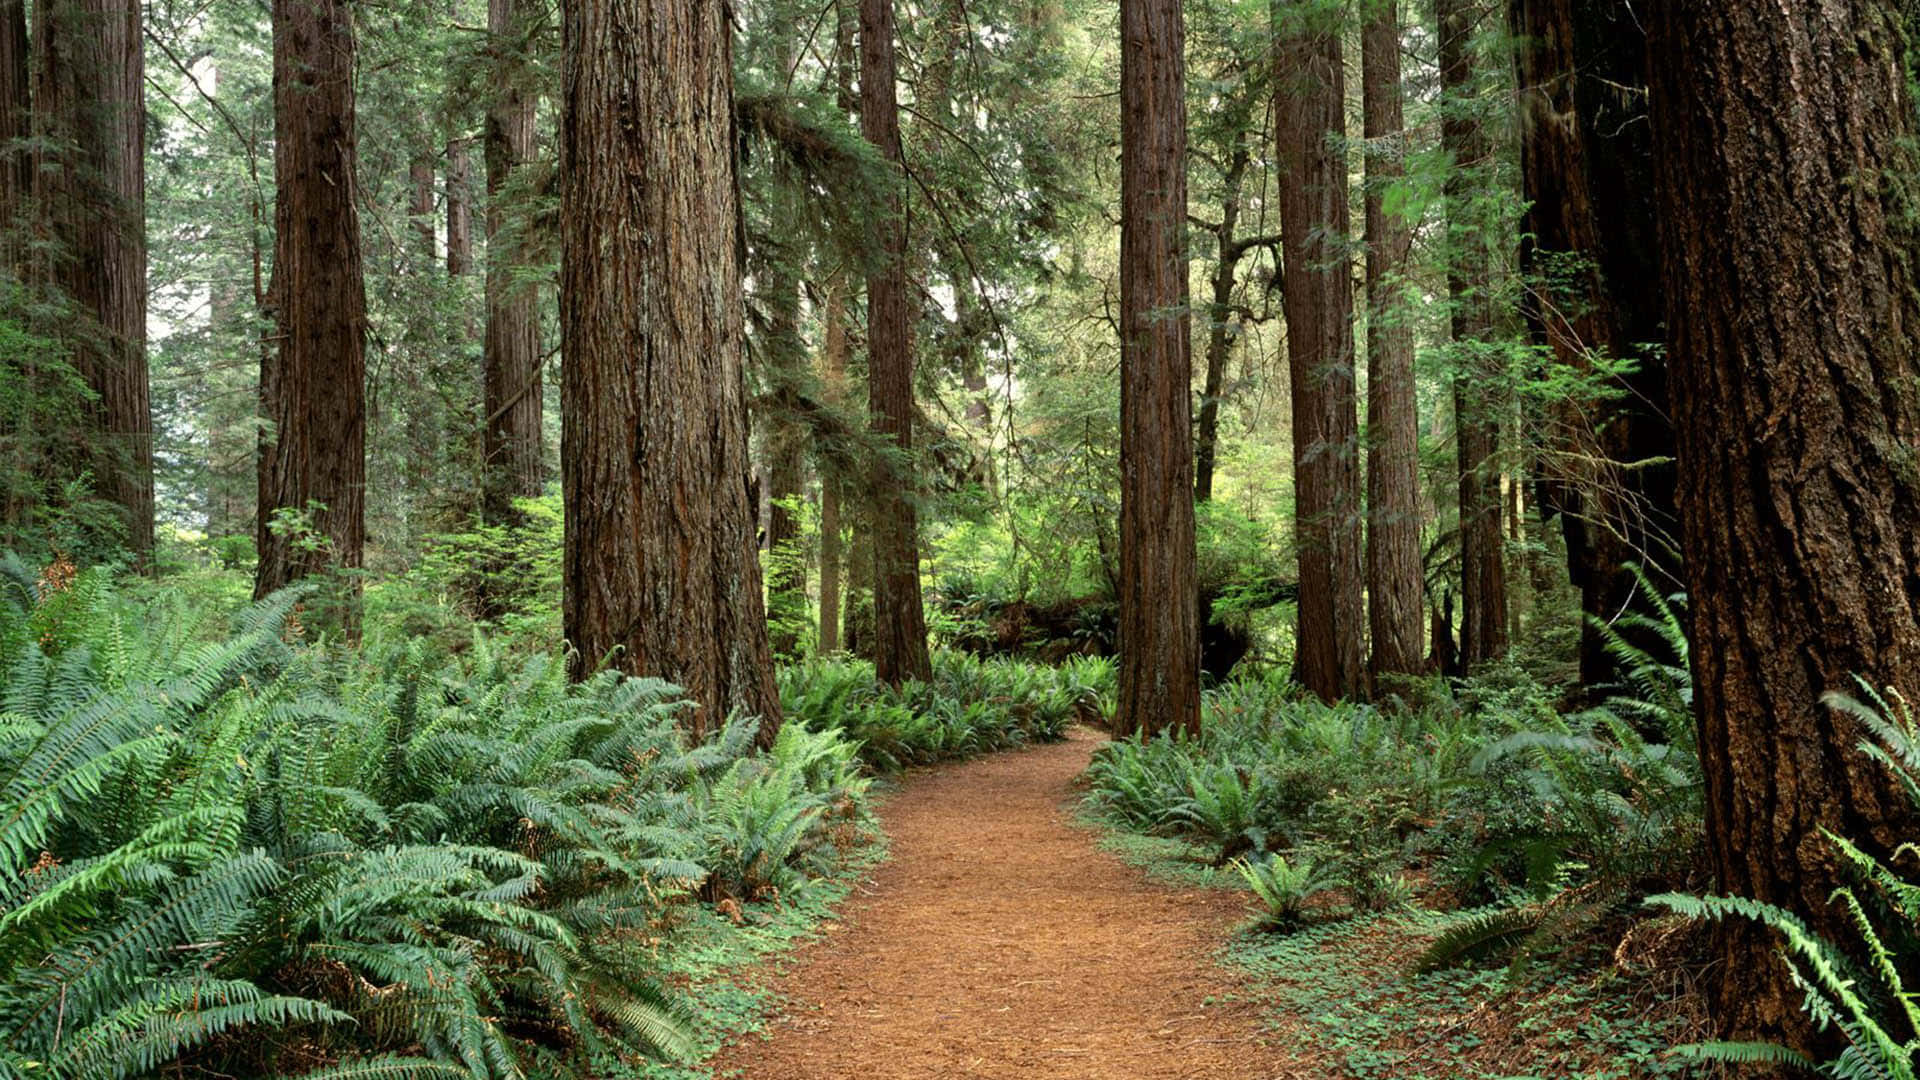 Redwood Trees in the Mixed Conifer Forest of California